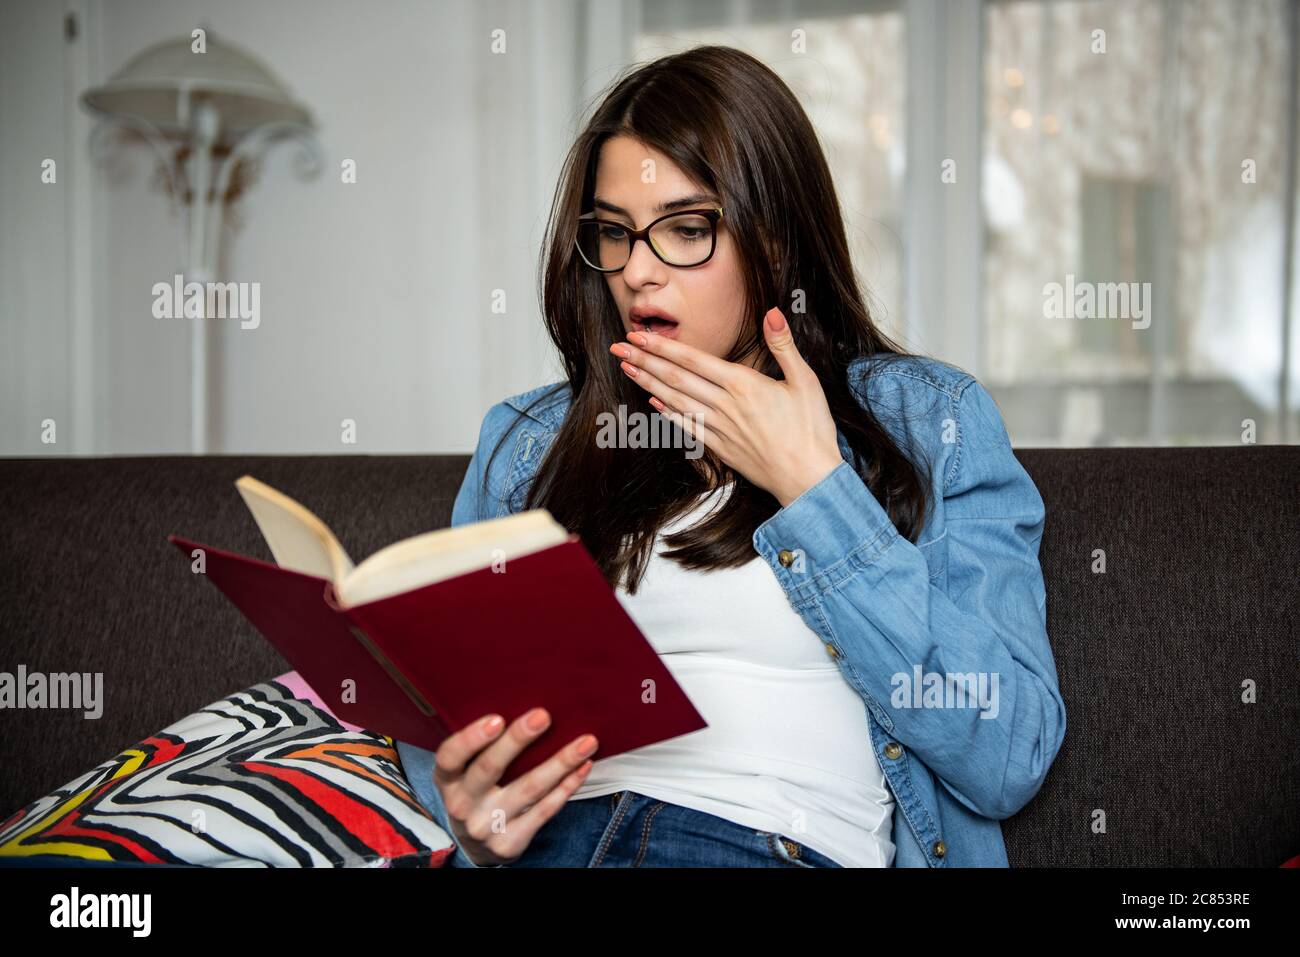 Shocked young woman with book sitting on sofa at home Shocked young woman with book sitting on sofa at home Stock Photo